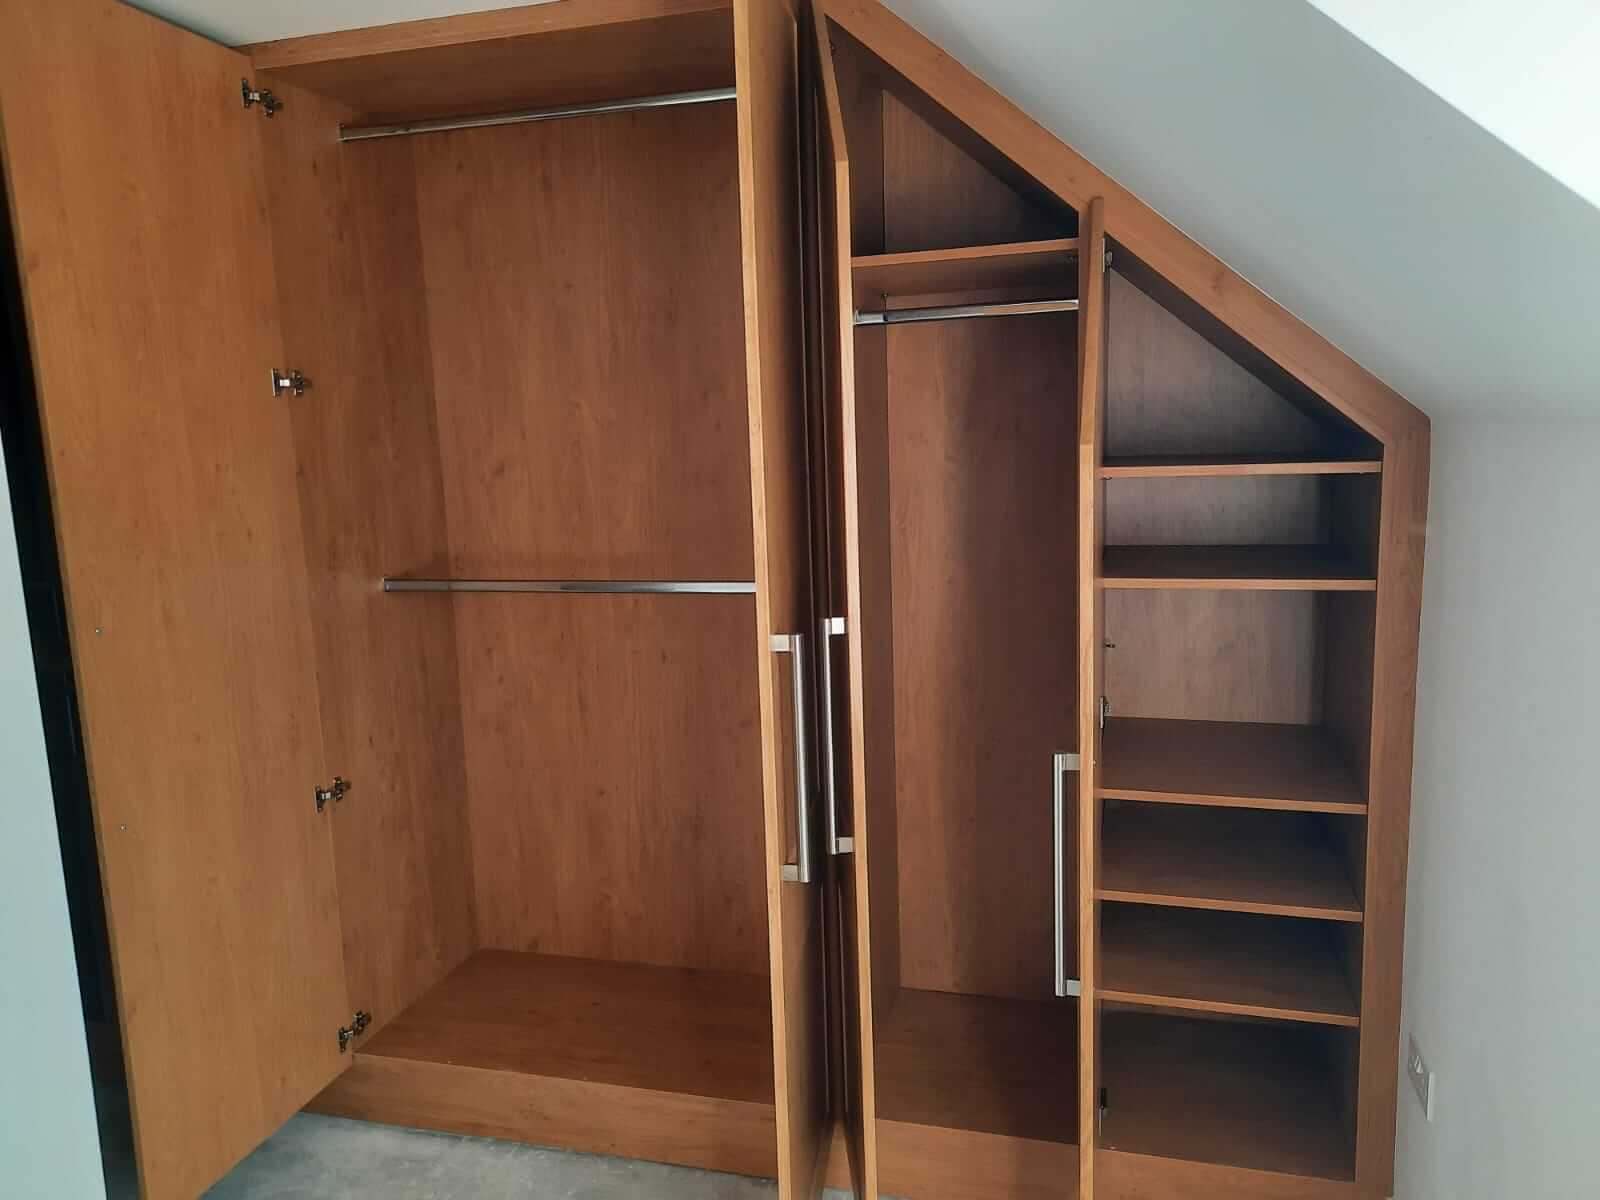 Bedroom Wardrobe Showing Interior and Detail of Angled Ceiling Fit